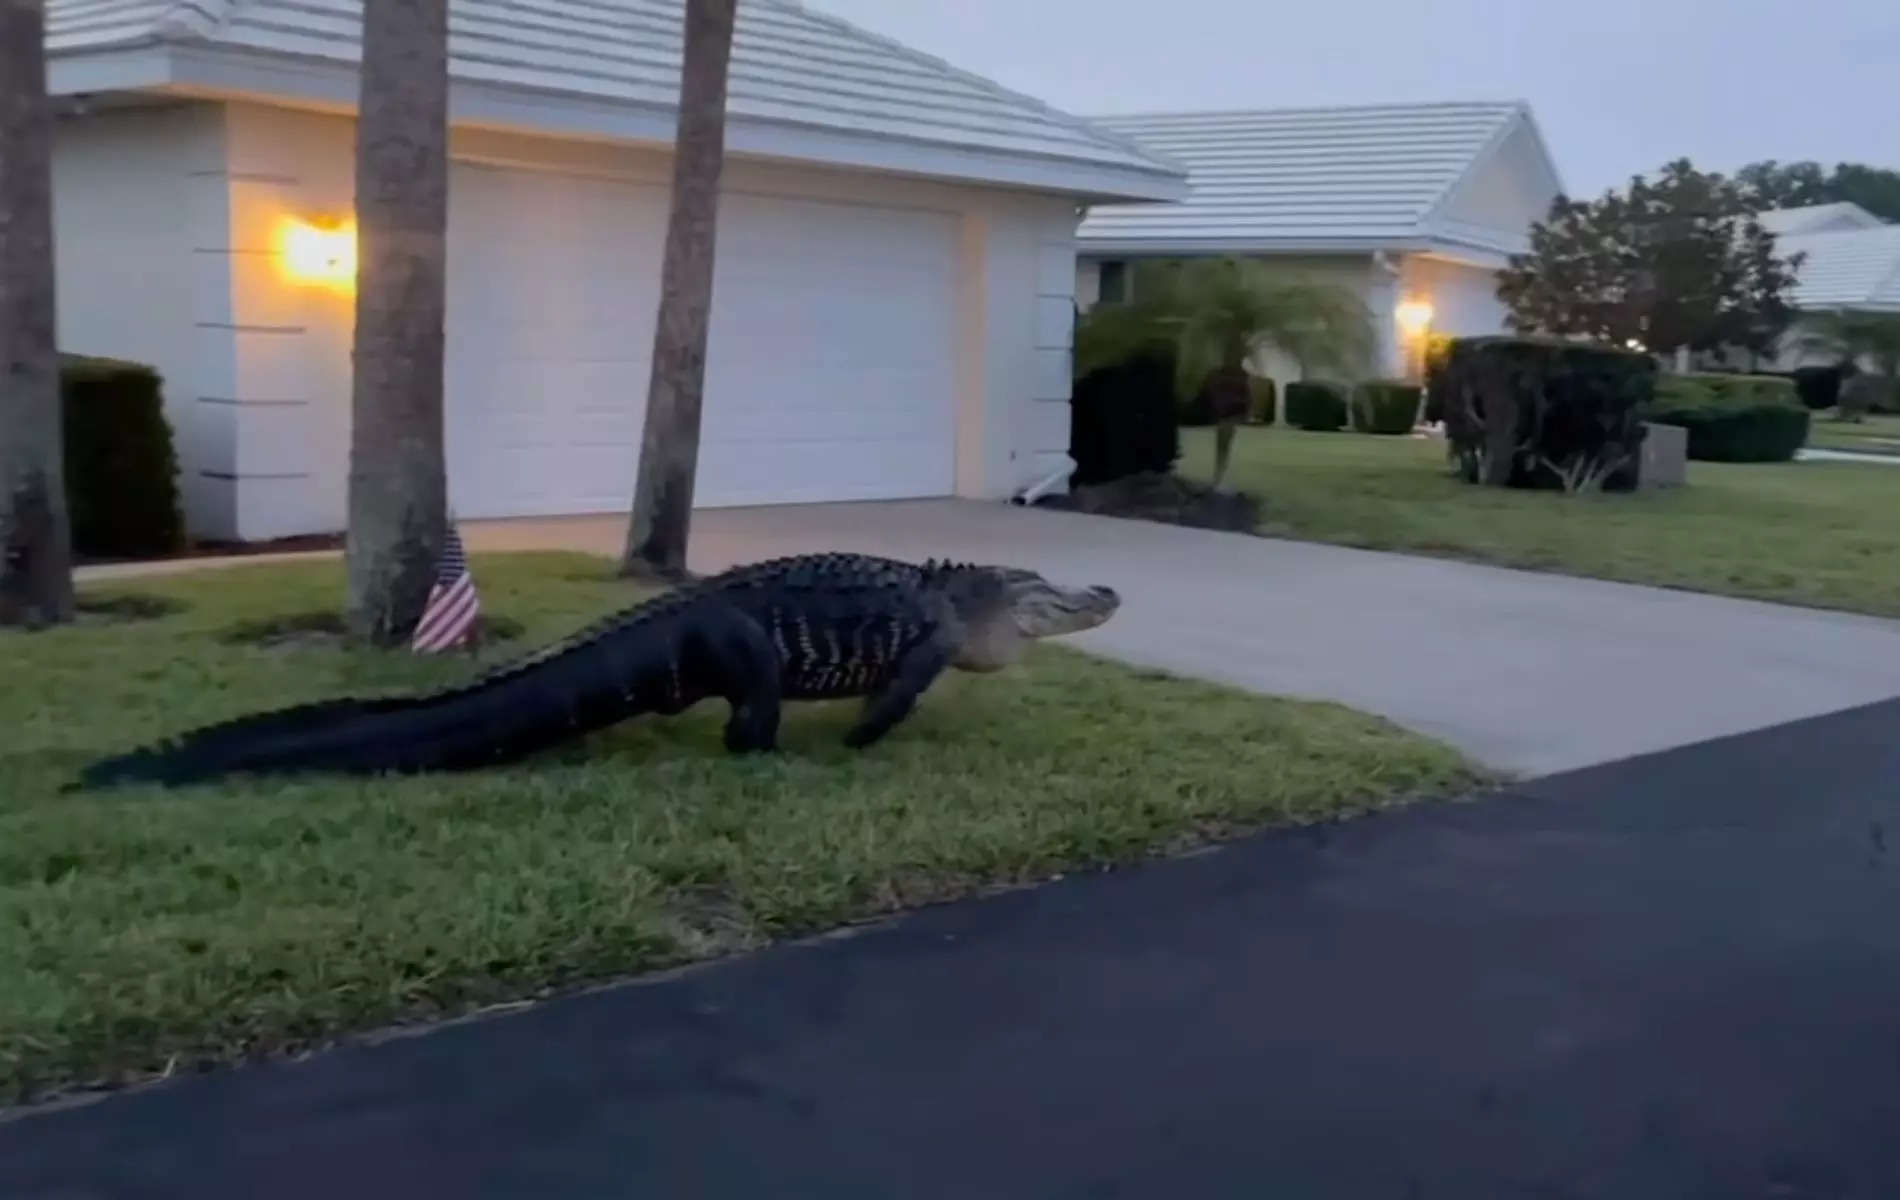 Screengrab from the video shared by Sarasota County Sheriff's Office